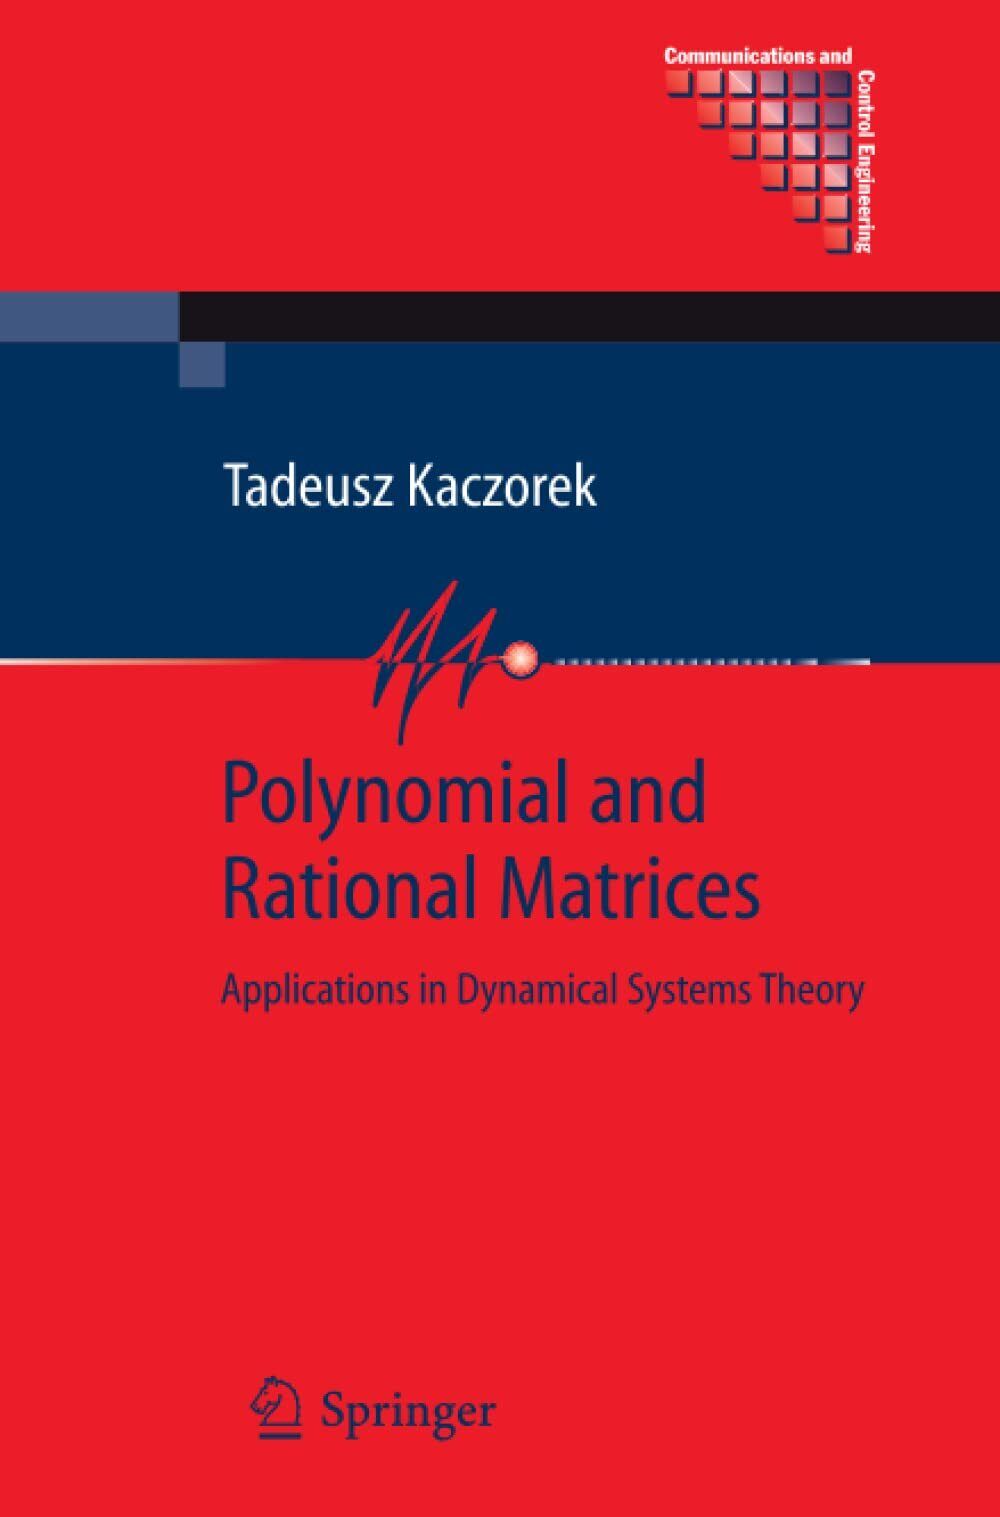 Polynomial and Rational Matrices: Applications in Dynamical Systems Theor - 2010 libro usato